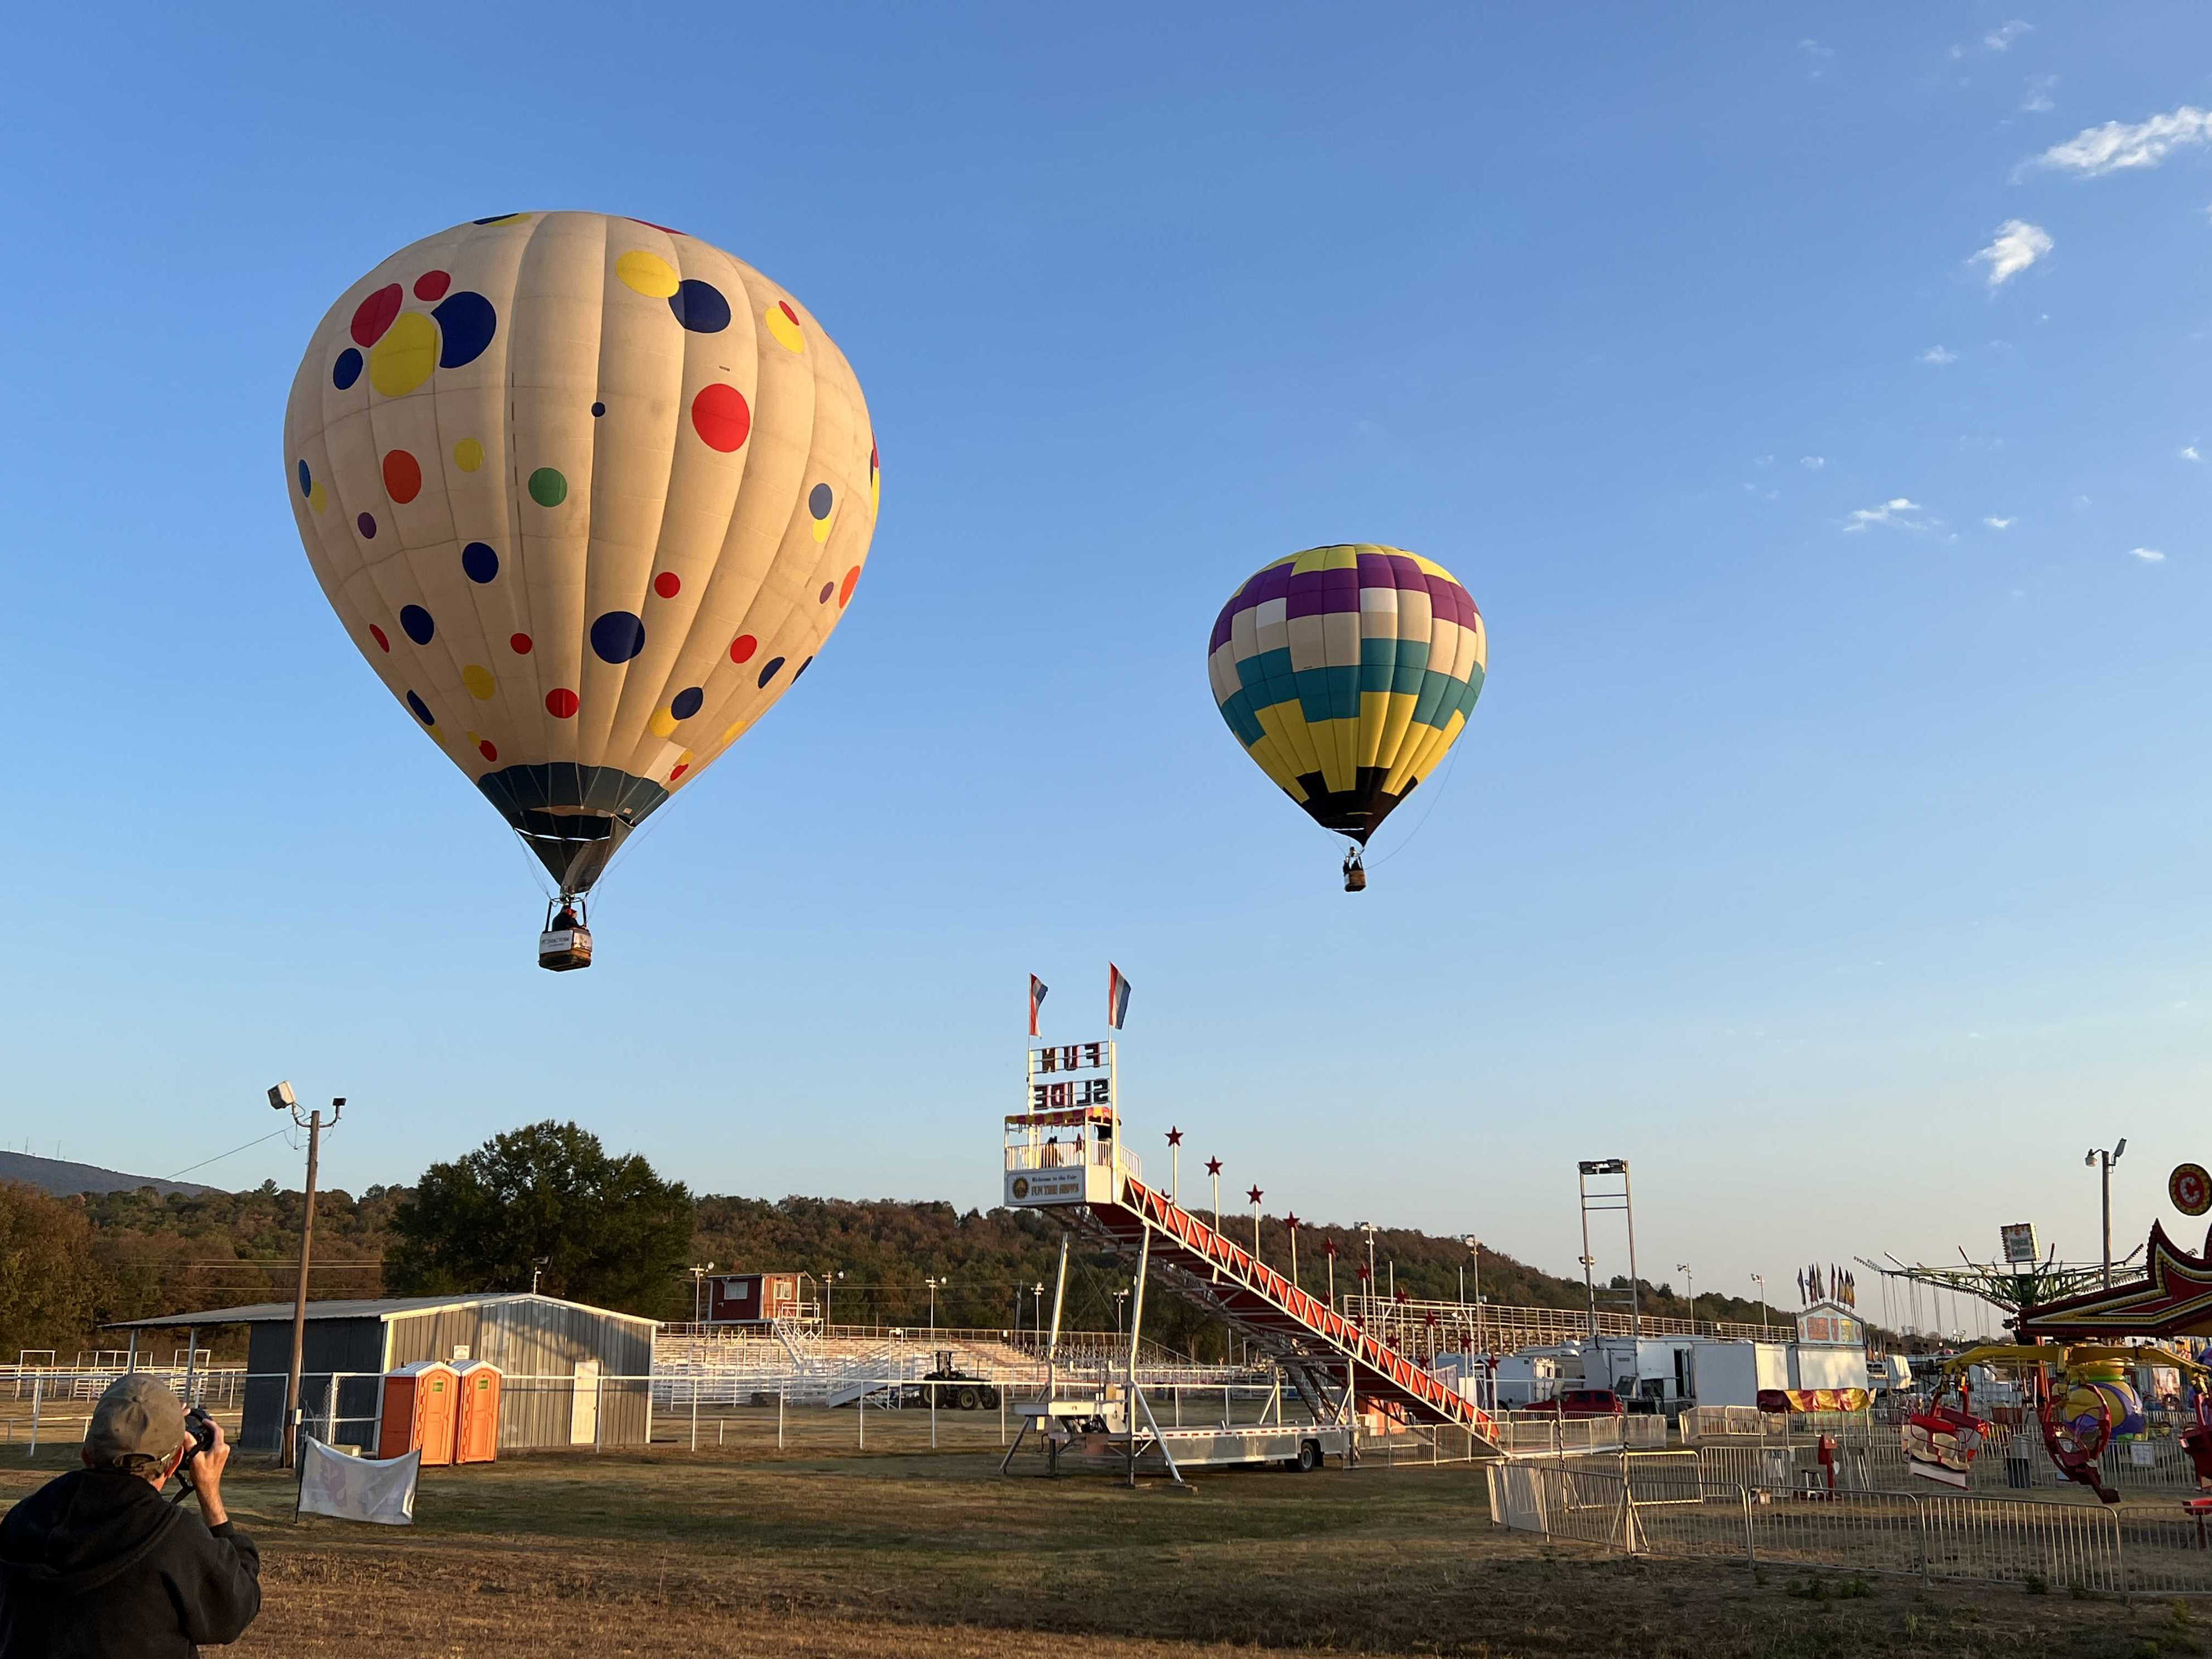 Poteau Balloon Festival lifts off with a carnival, balloon rides, and more